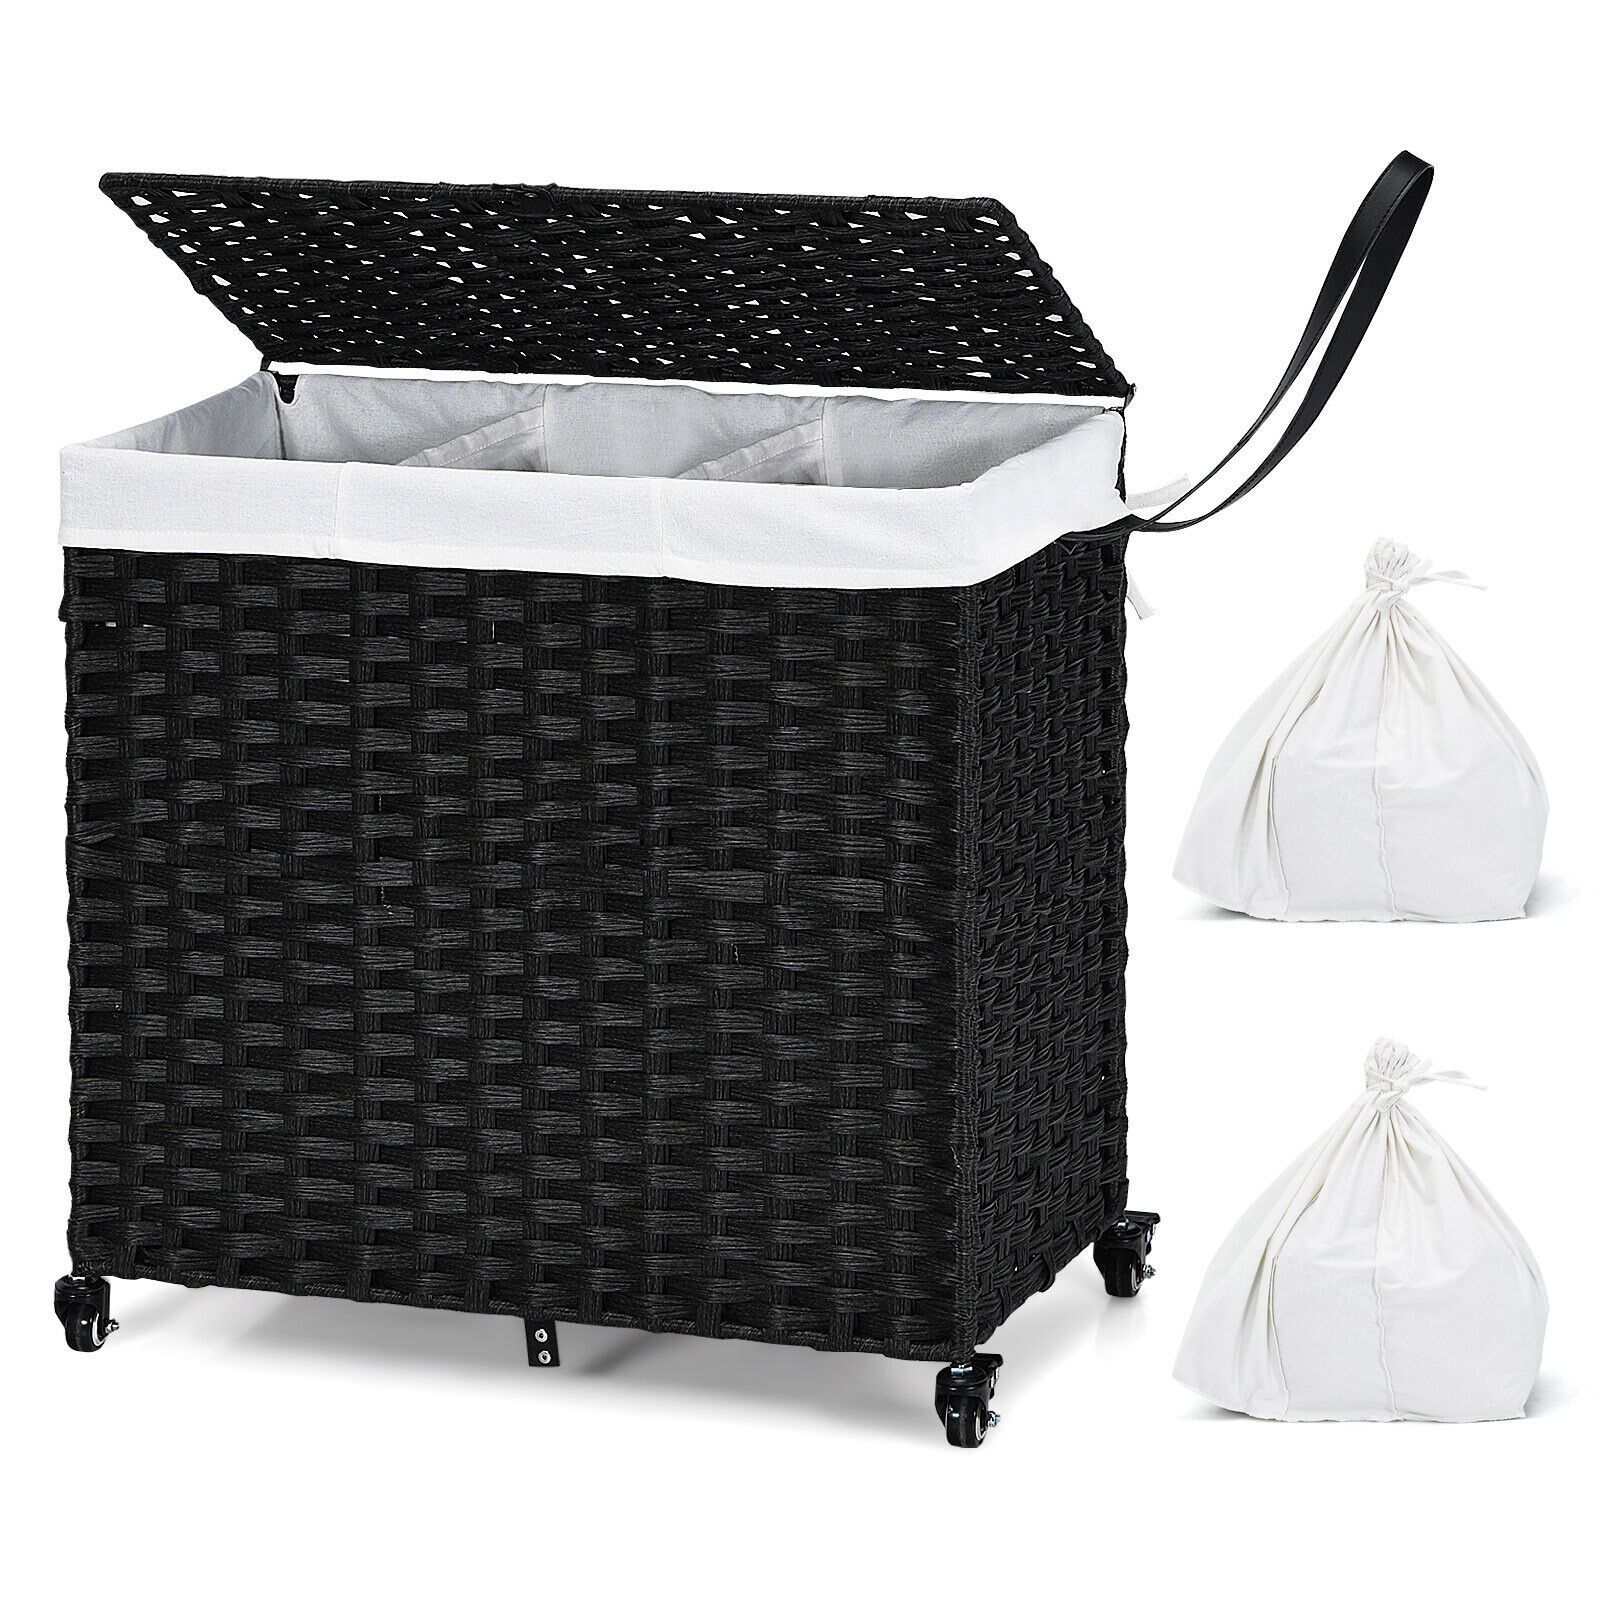 Primary image for Laundry Hamper w/Wheels & Lid, 125L 3-Section Clothes Hamper w/2 Liner Bags